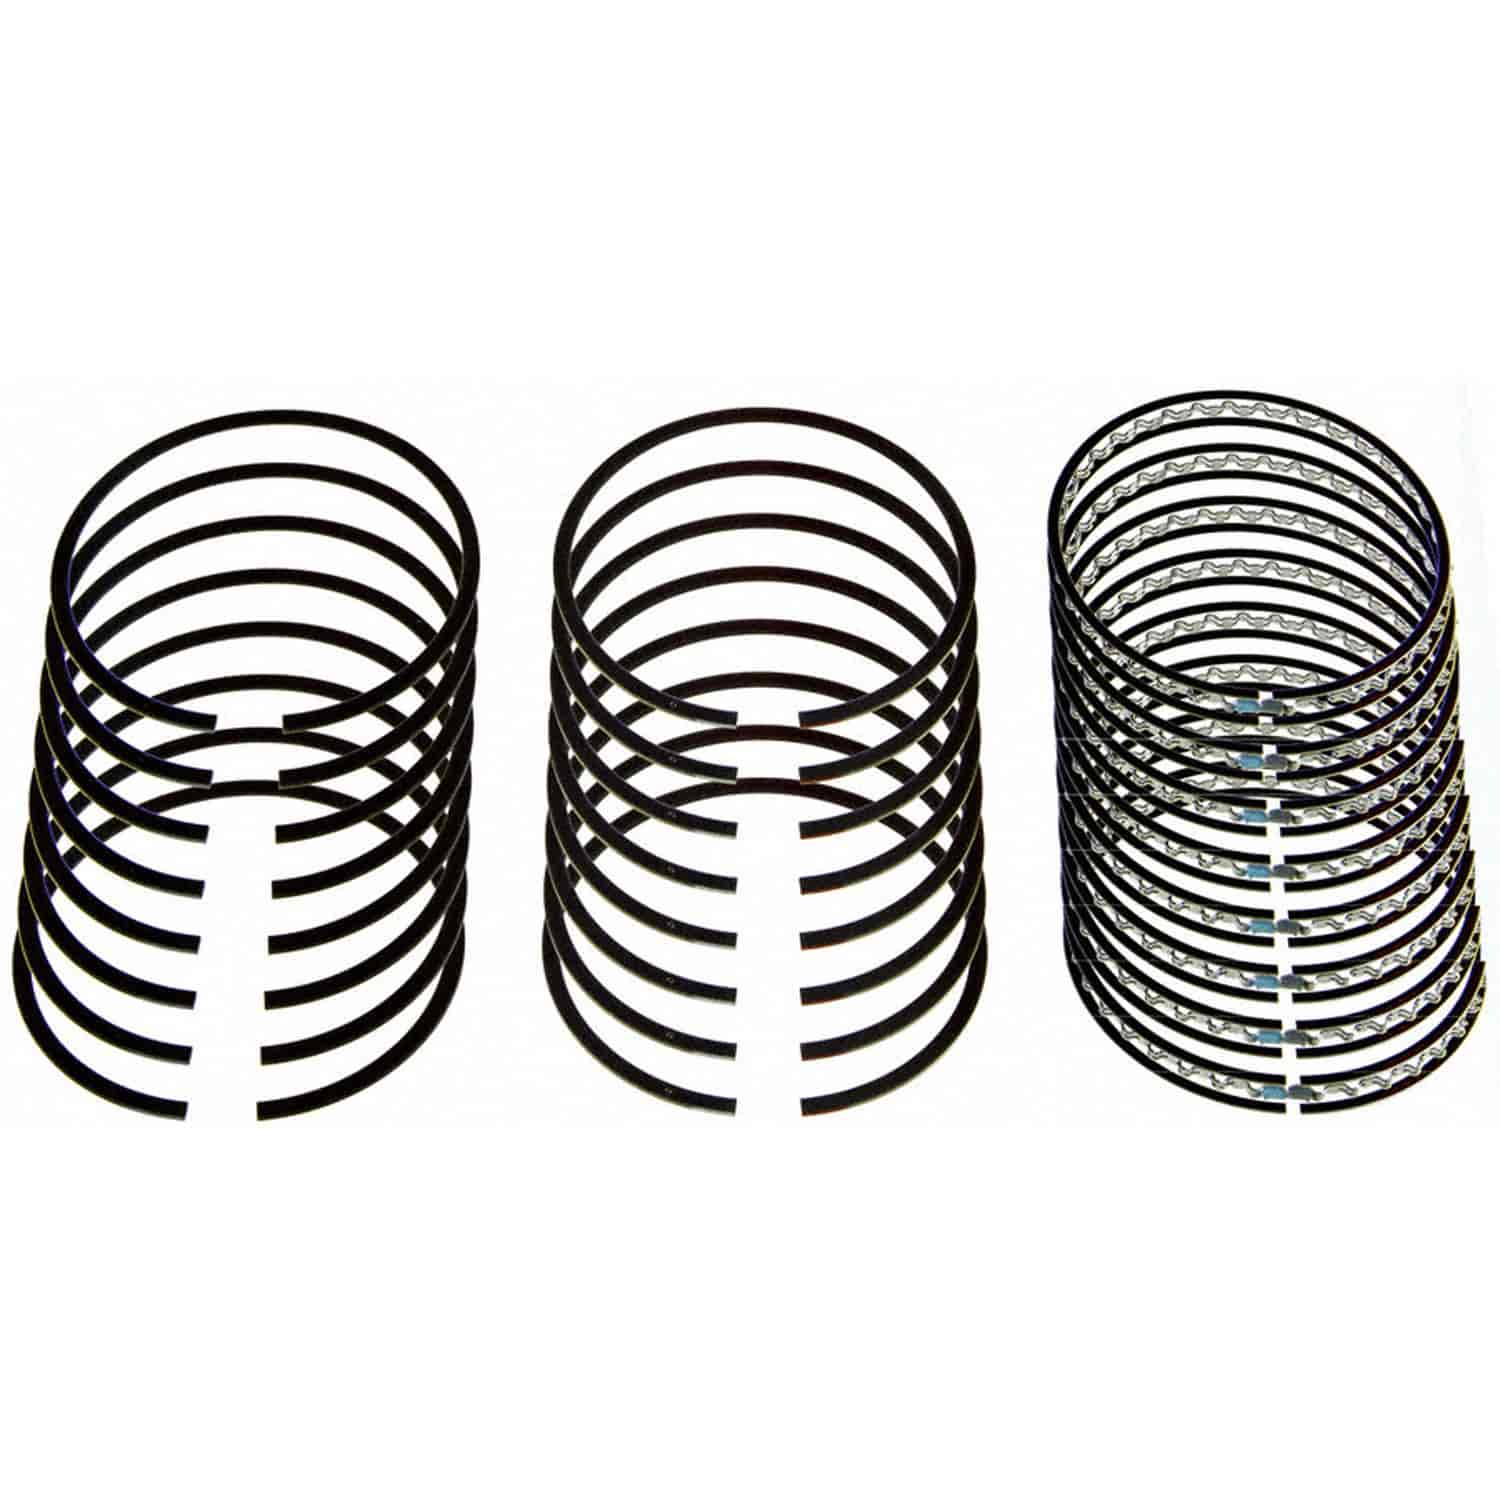 Cast Piston Ring Set for Chrysler, Dodge, Plymouth 440 ci. Engines w/4.320 in. Bore (Std.)